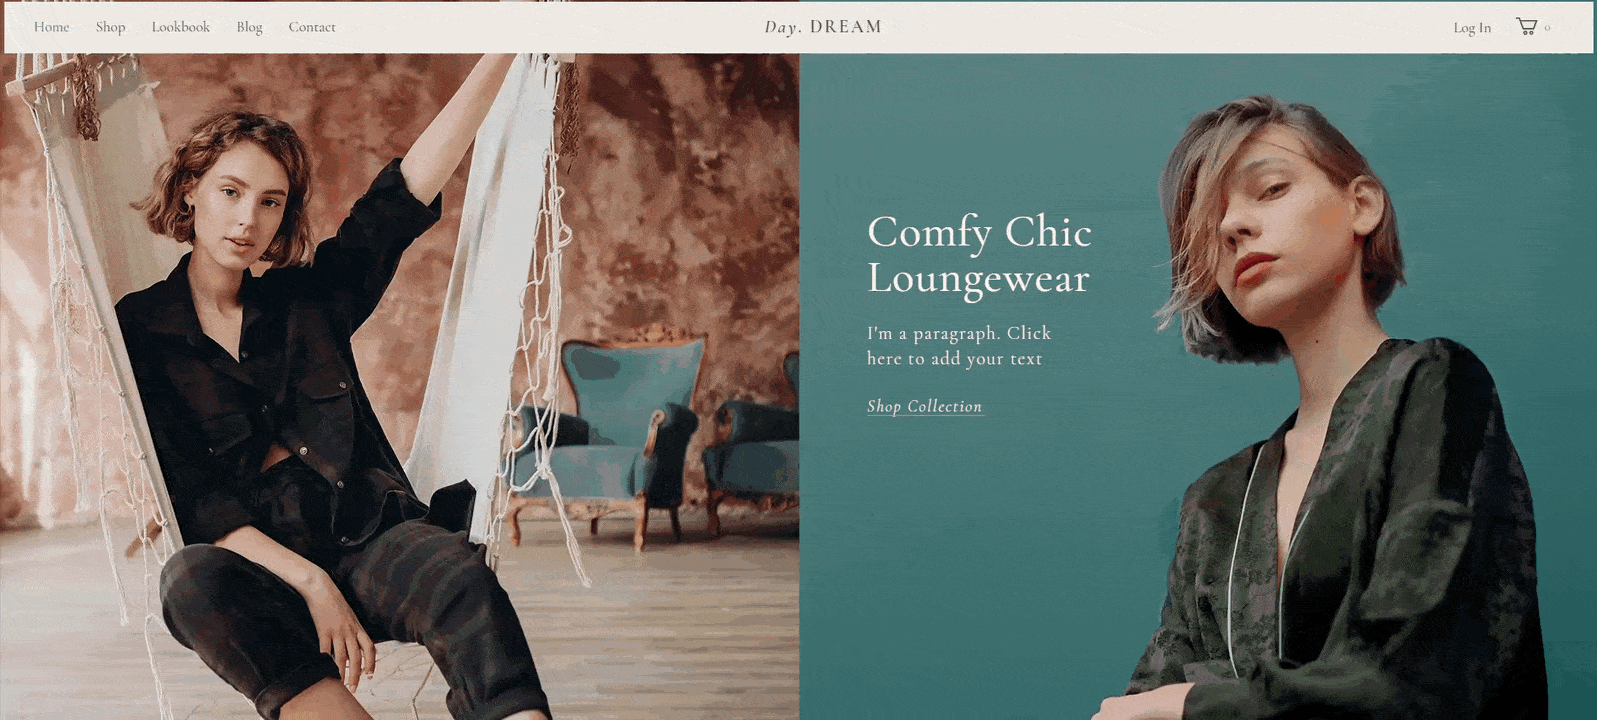 The home page of Wix's Loungewear store template